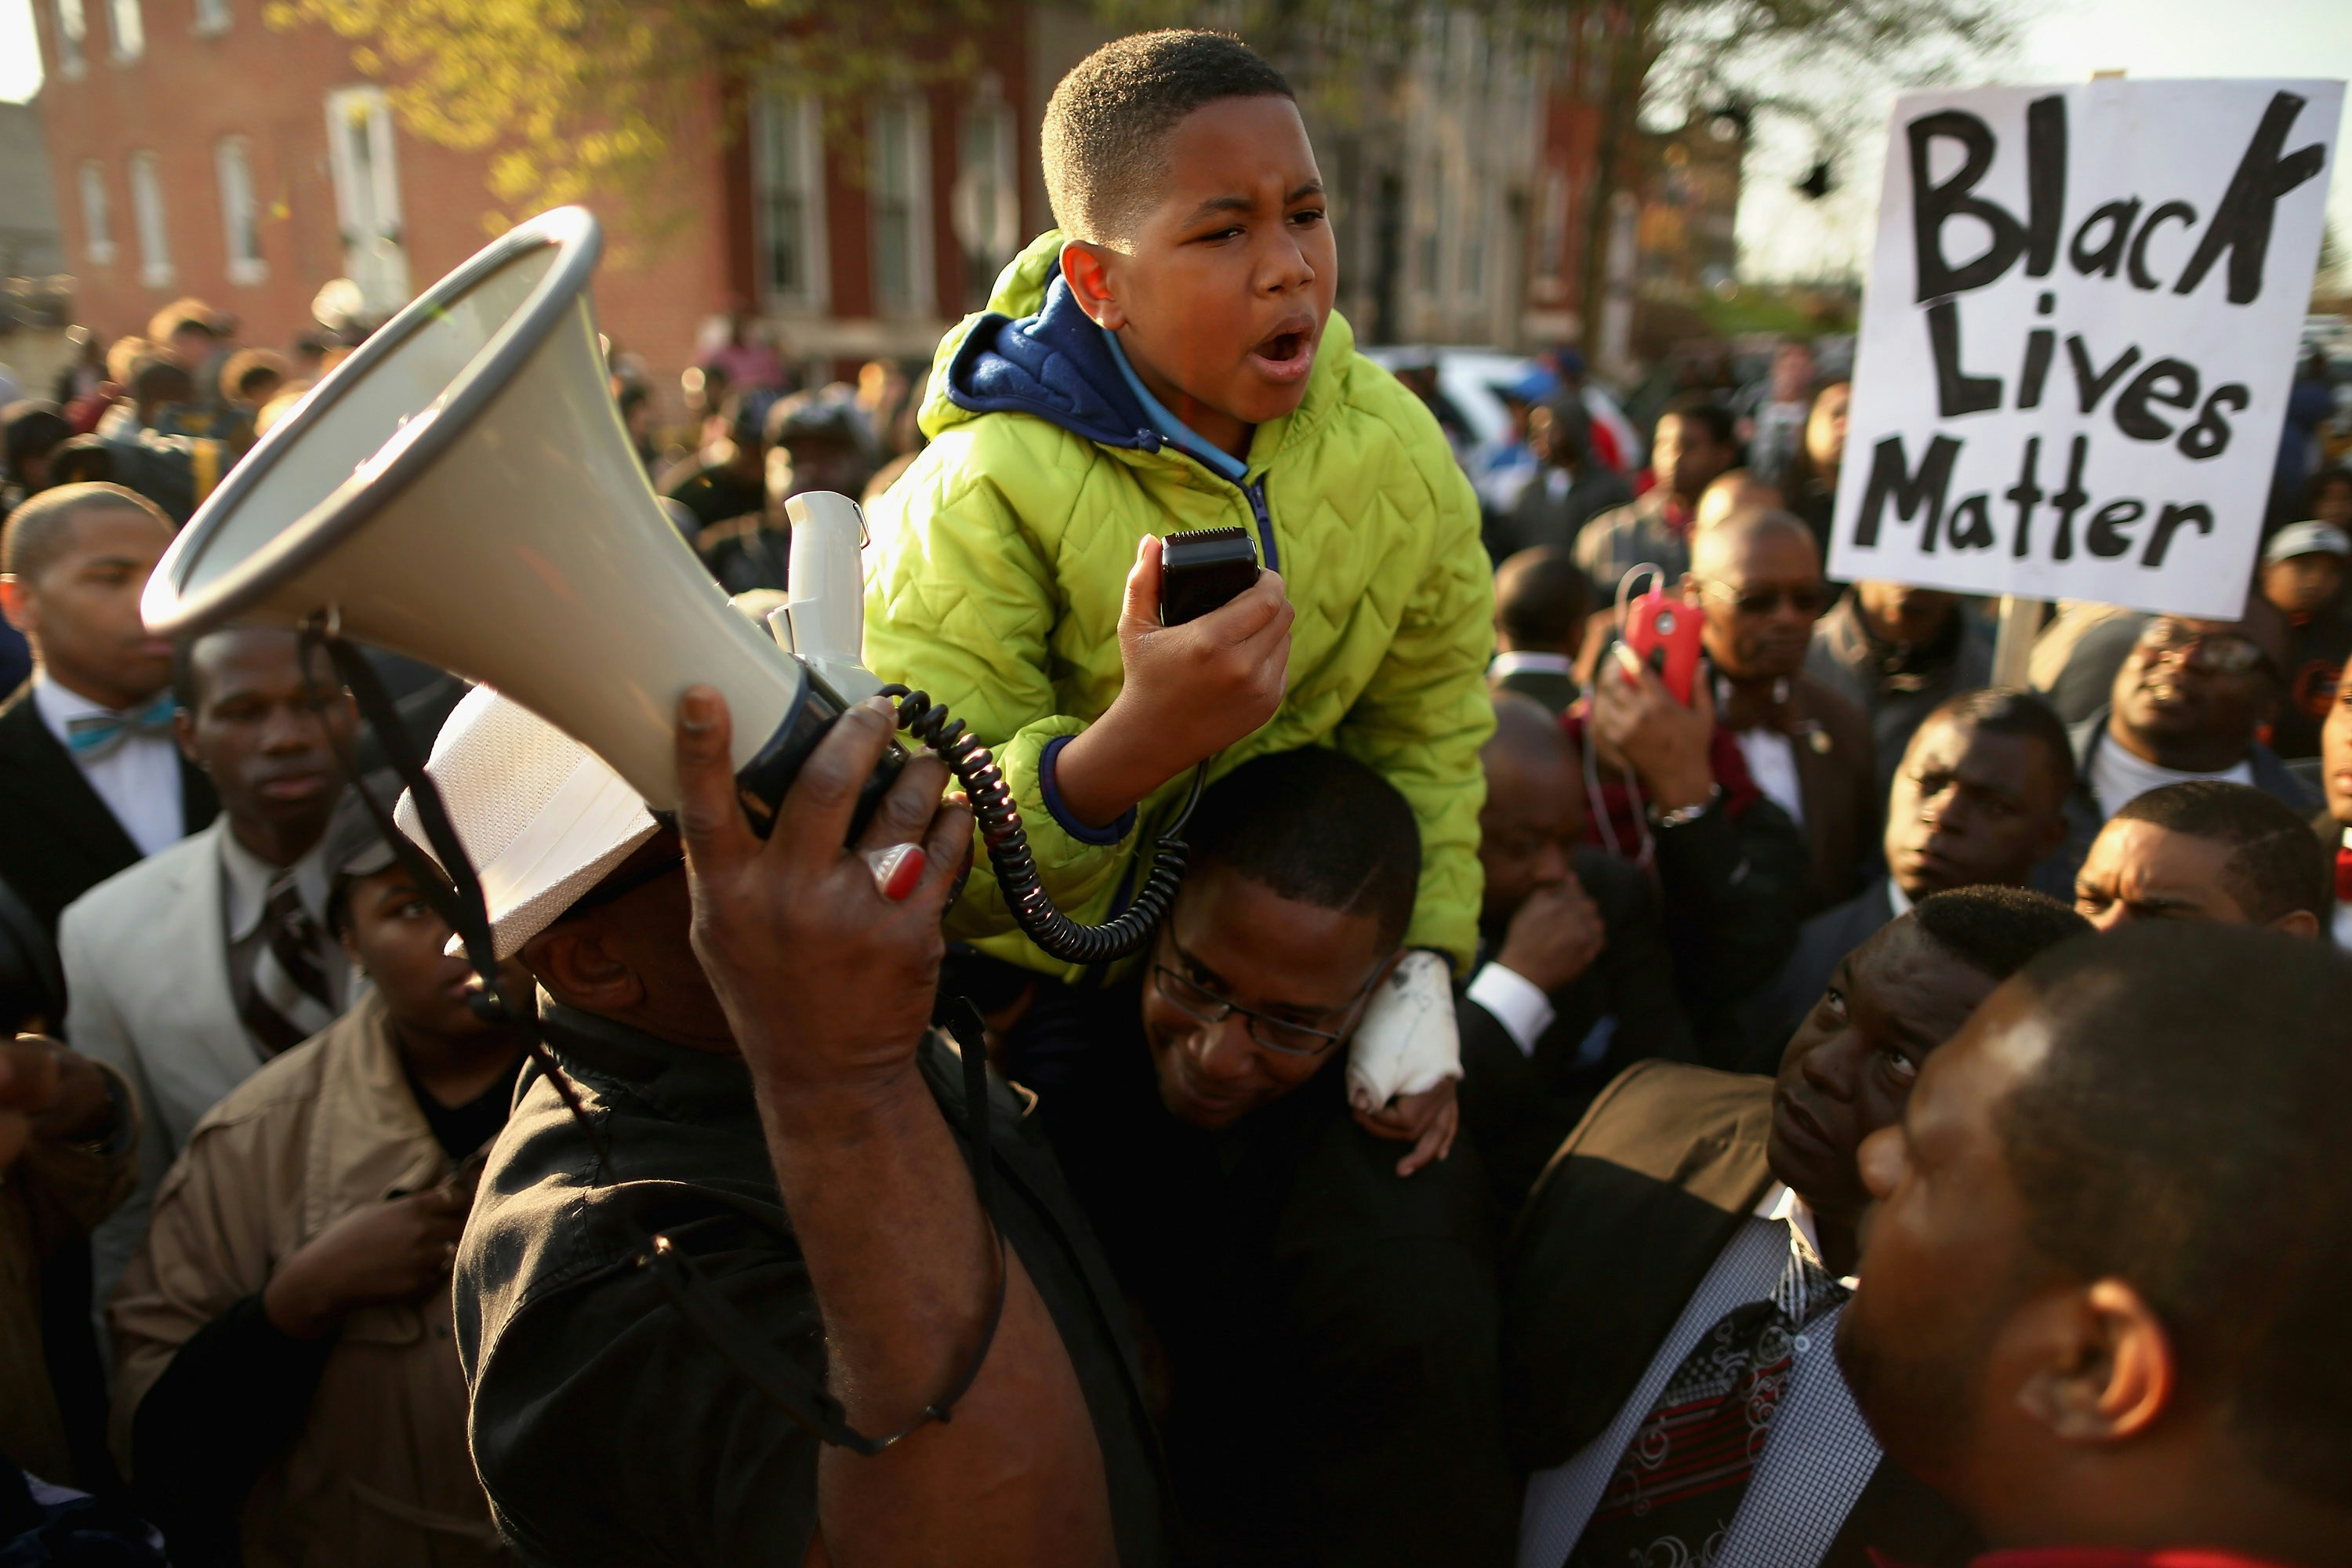 BALTIMORE, MD - APRIL 22:  Ten-year-old Robert Dunn uses a megaphone to address hundreds of demonstrators during a protest against police brutality and the death of Freddie Gray outside the Baltimore Police Western District station April 22, 2015 in Baltimore, Maryland. Gray, 25, was arrested for possessing a switch blade knife April 12 outside the Gilmor Homes housing project on Baltimore's west side. According to his attorney, Gray died a week later in the hospital from a severe spinal cord injury he received while in police custody.  (Photo by Chip Somodevilla/Getty Images)